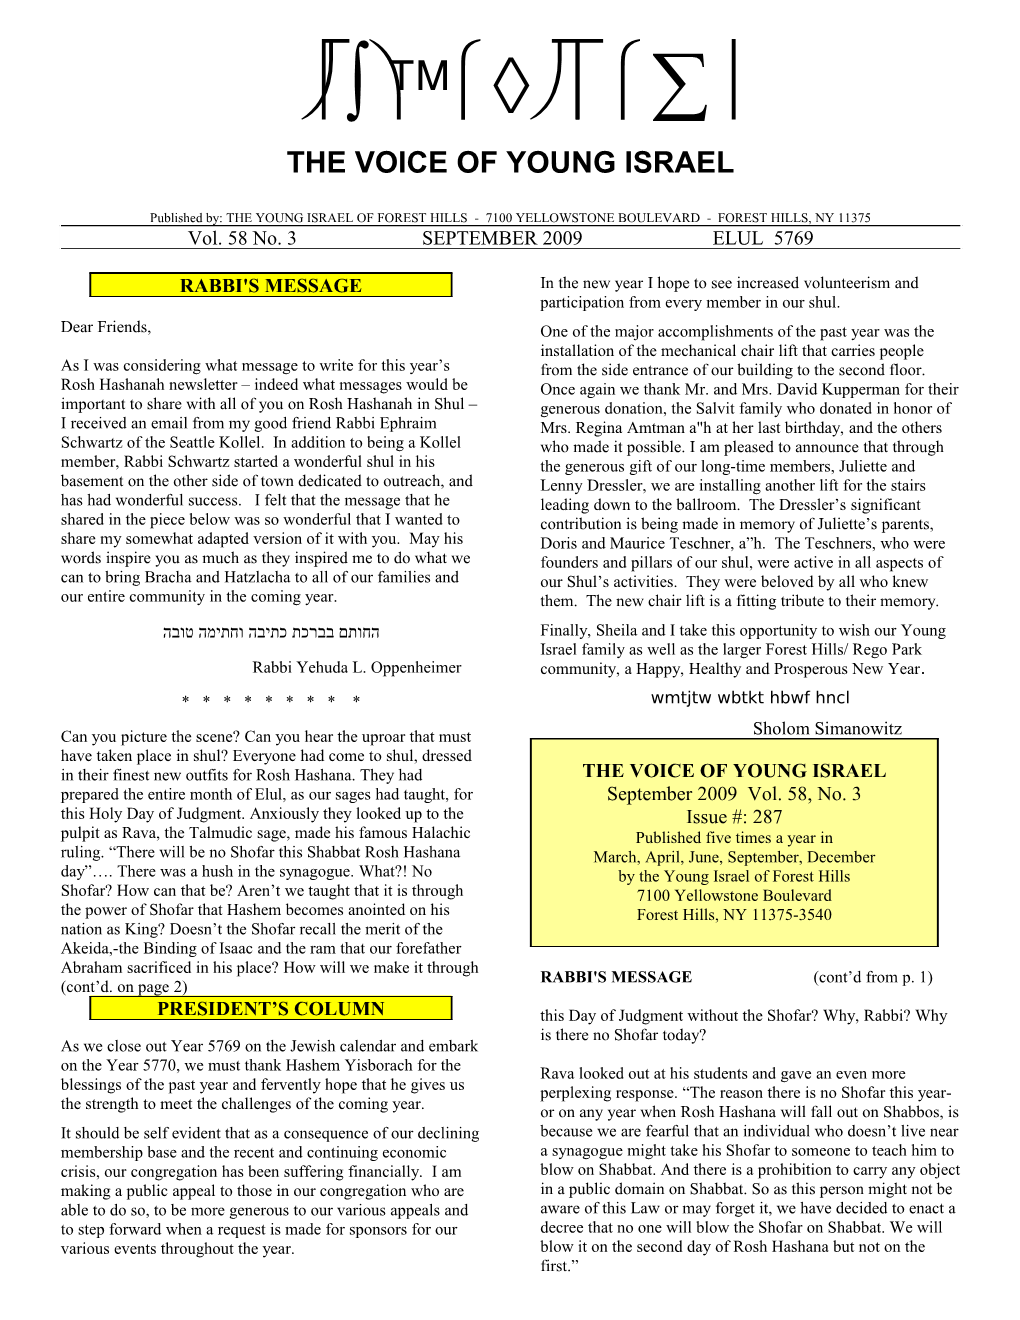 The Voice of Young Israel